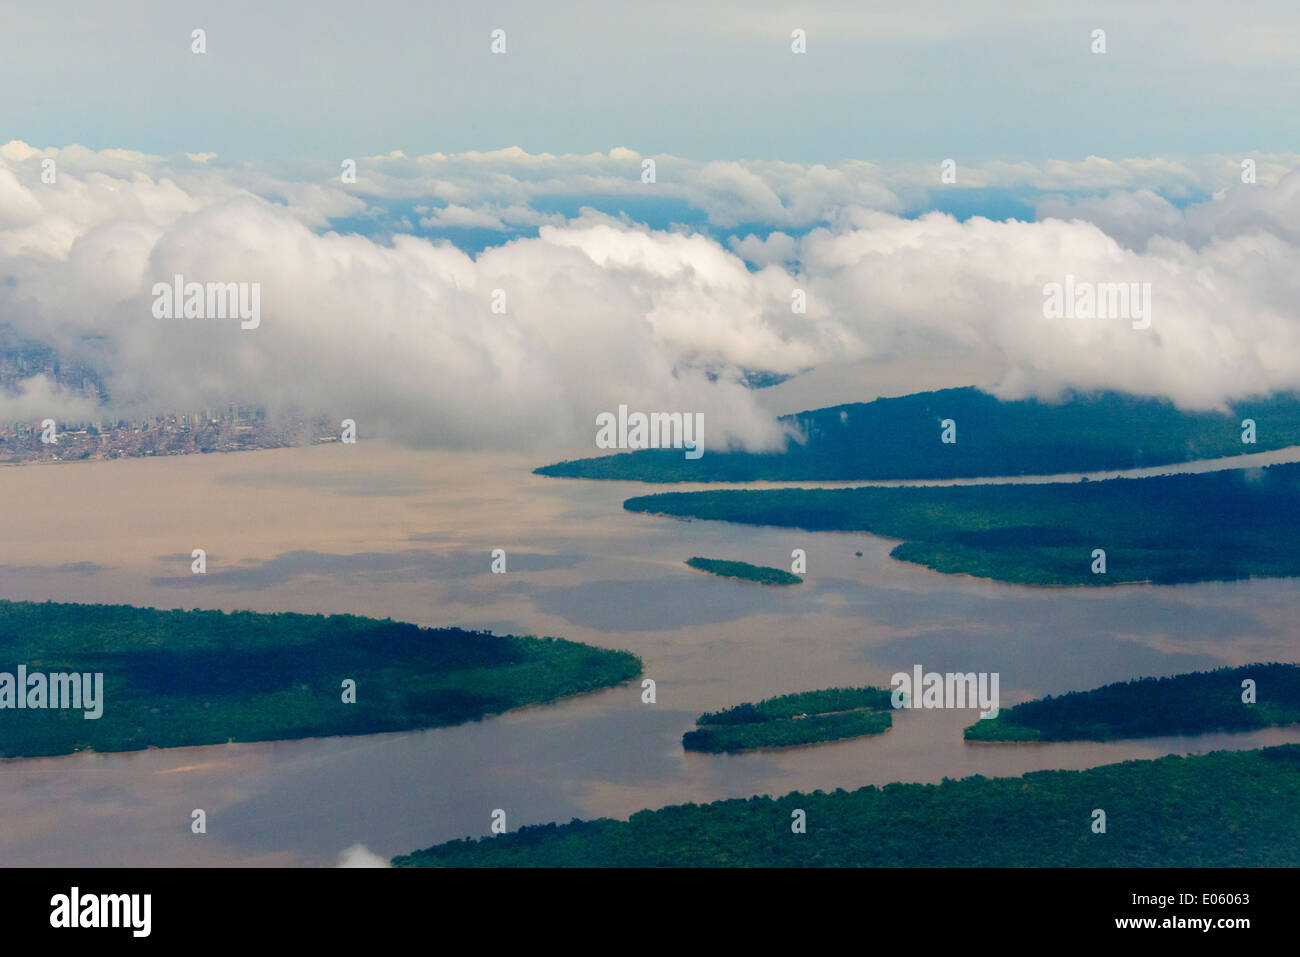 Aerial view of the Amazon River, Brazil Stock Photo